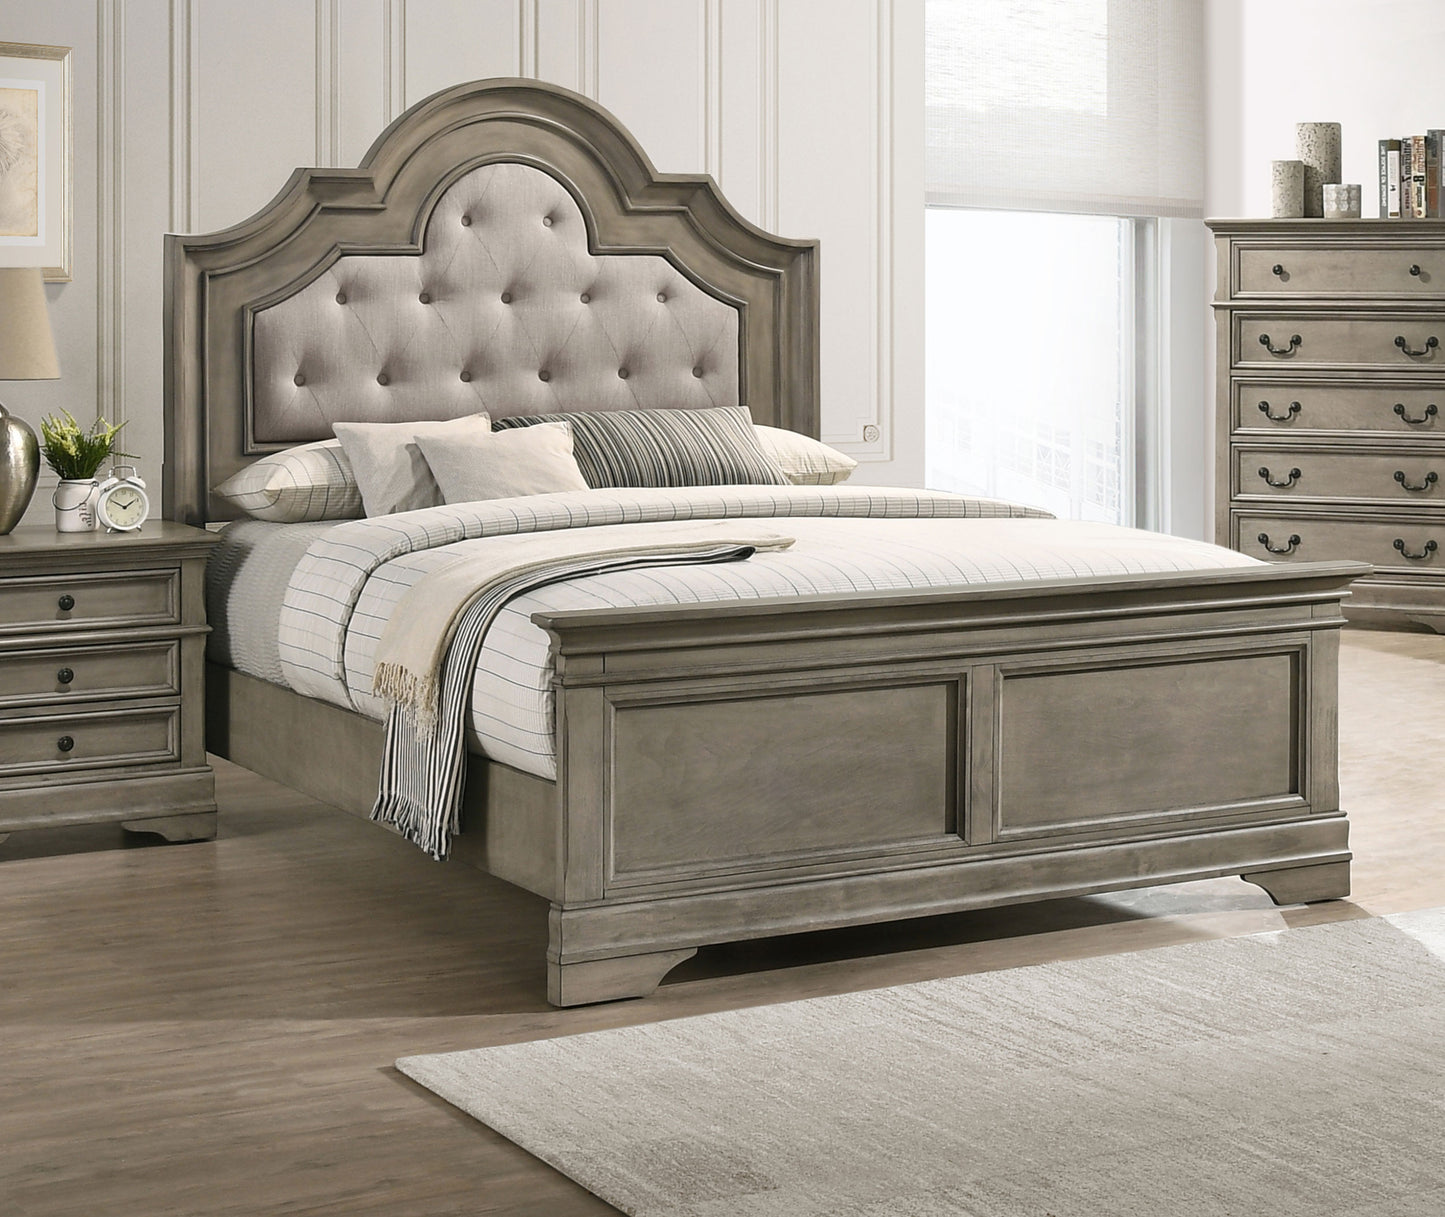 Manchester Wood Queen Panel Bed Wheat Brown